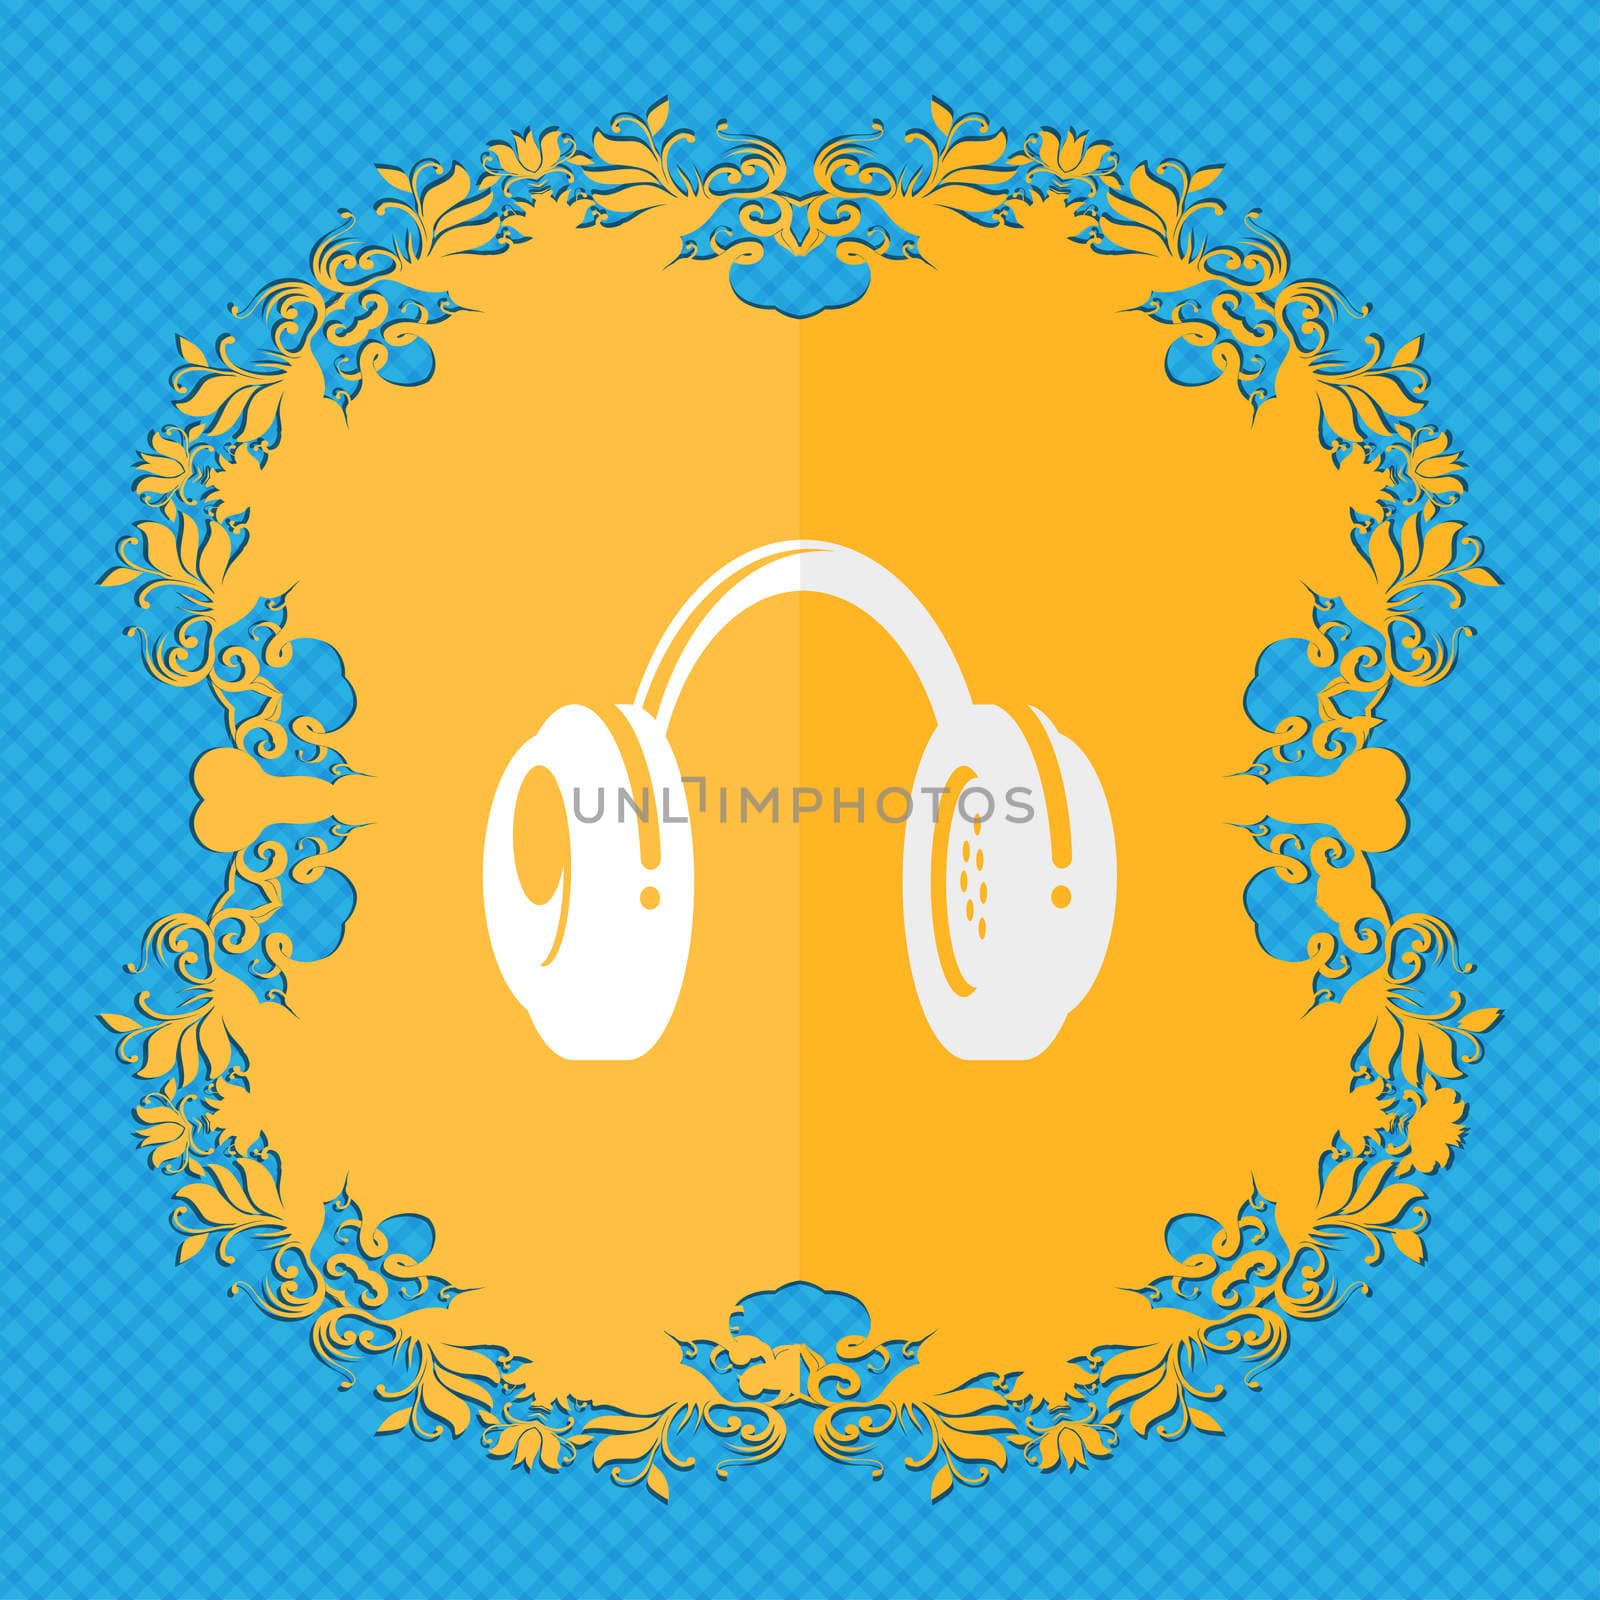 headsets. Floral flat design on a blue abstract background with place for your text. illustration